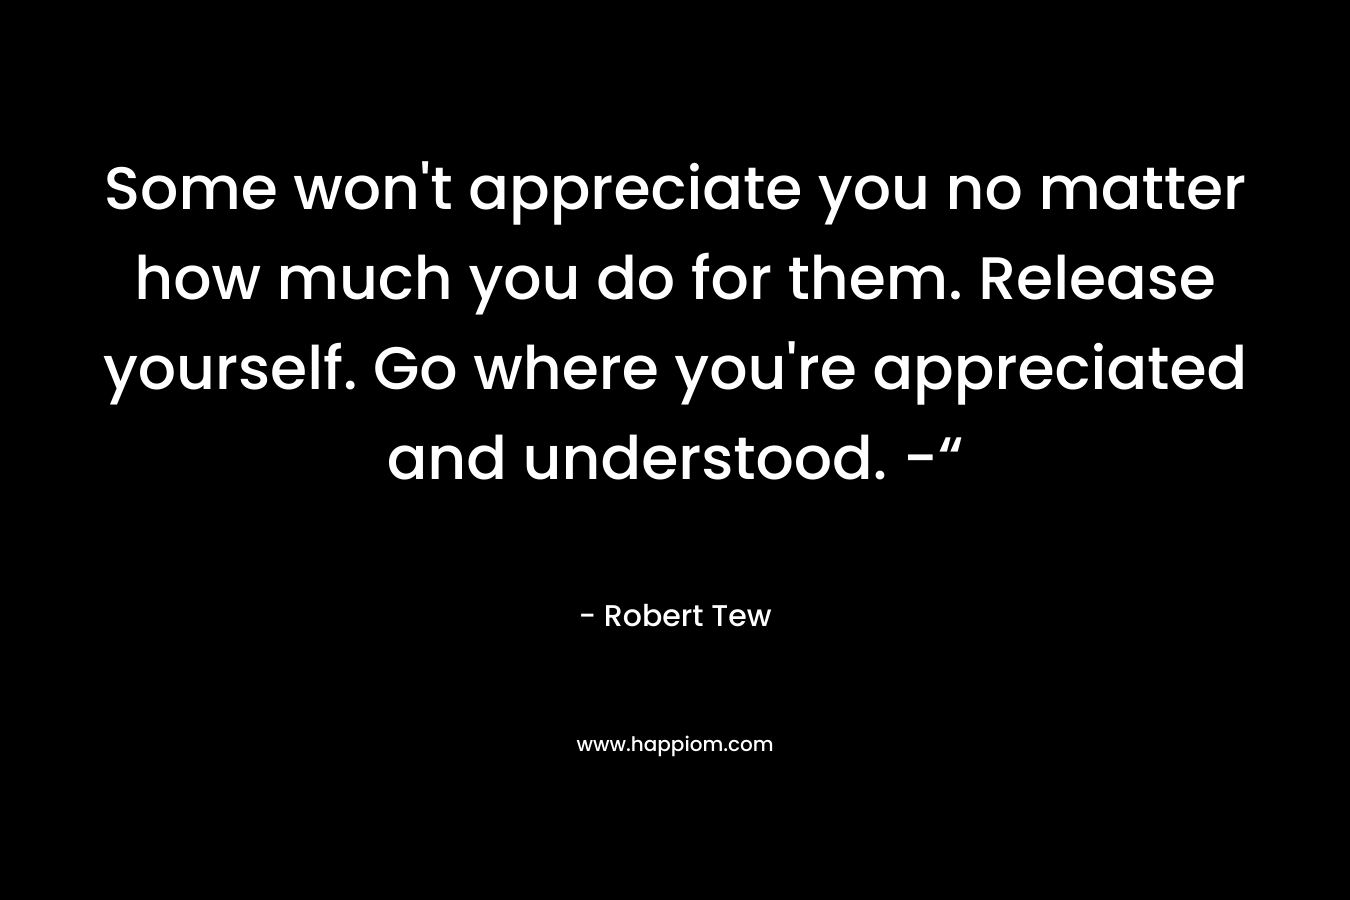 Some won't appreciate you no matter how much you do for them. Release yourself. Go where you're appreciated and understood. -“